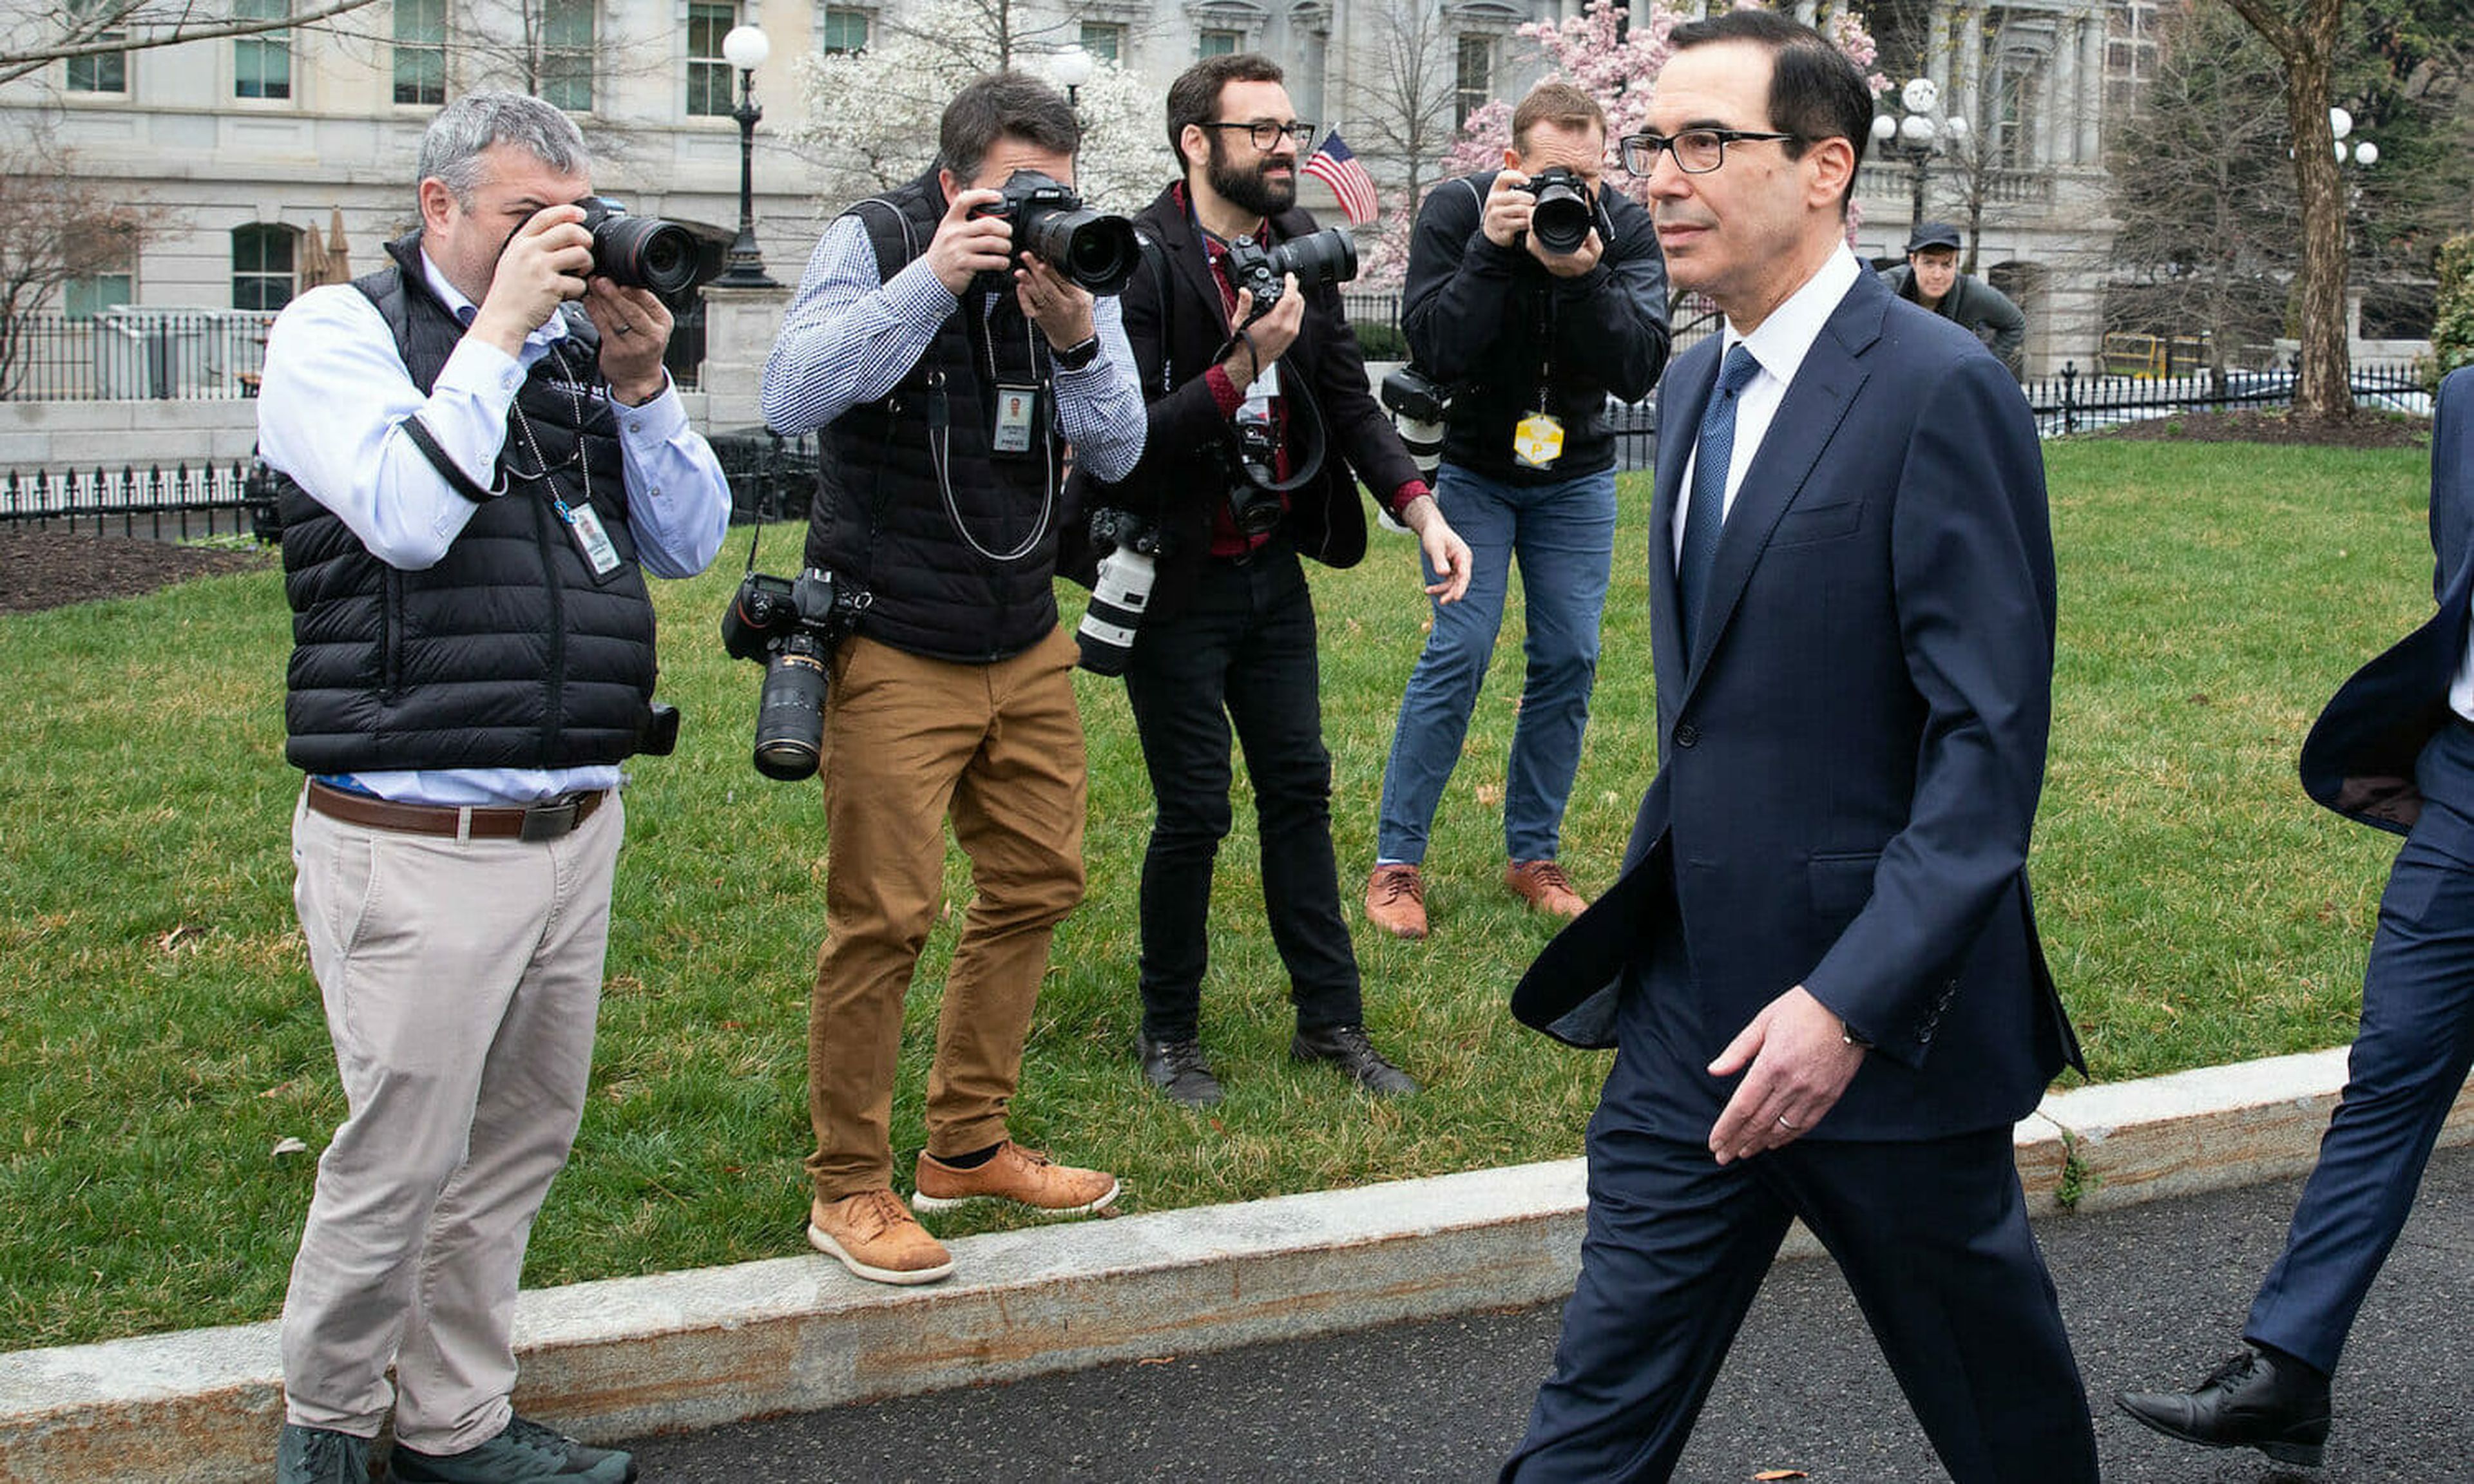 Secretary of the Treasury Steven Mnuchin, March 13, 2020, outside of the West Wing of the White House. (Official White House Photo by Keegan Barber)